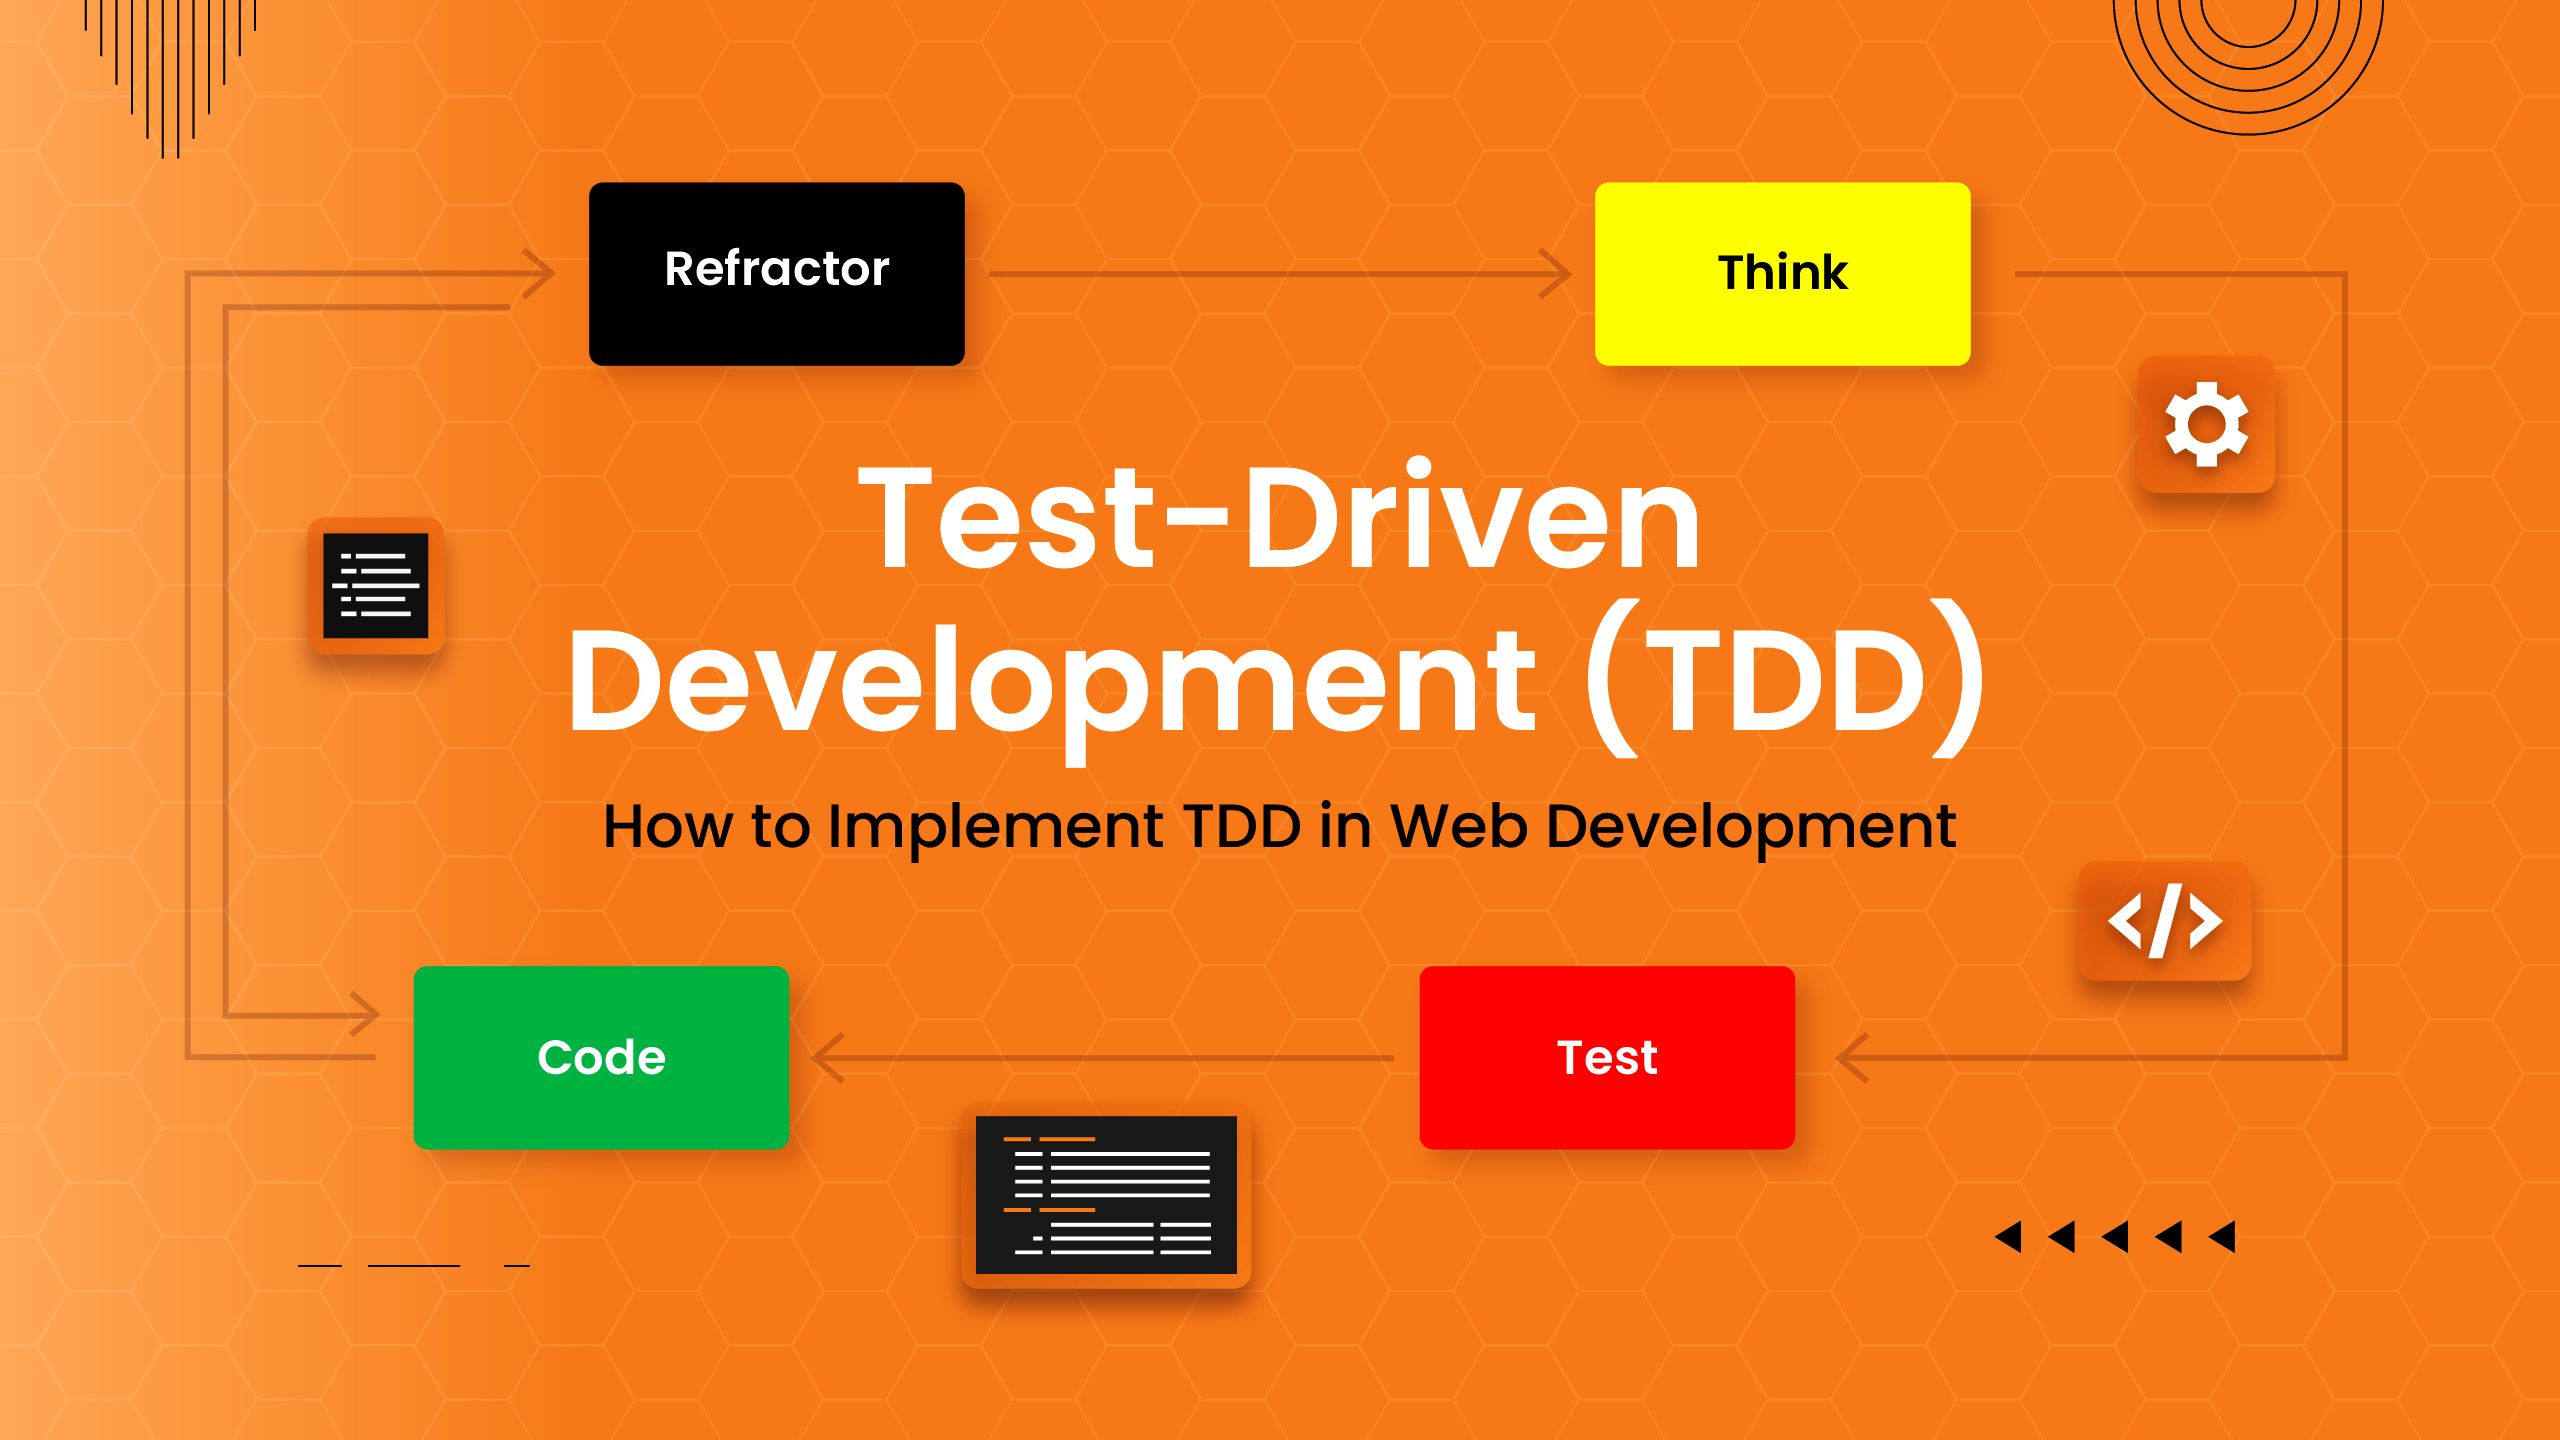 How to Implement TDD in Web Development